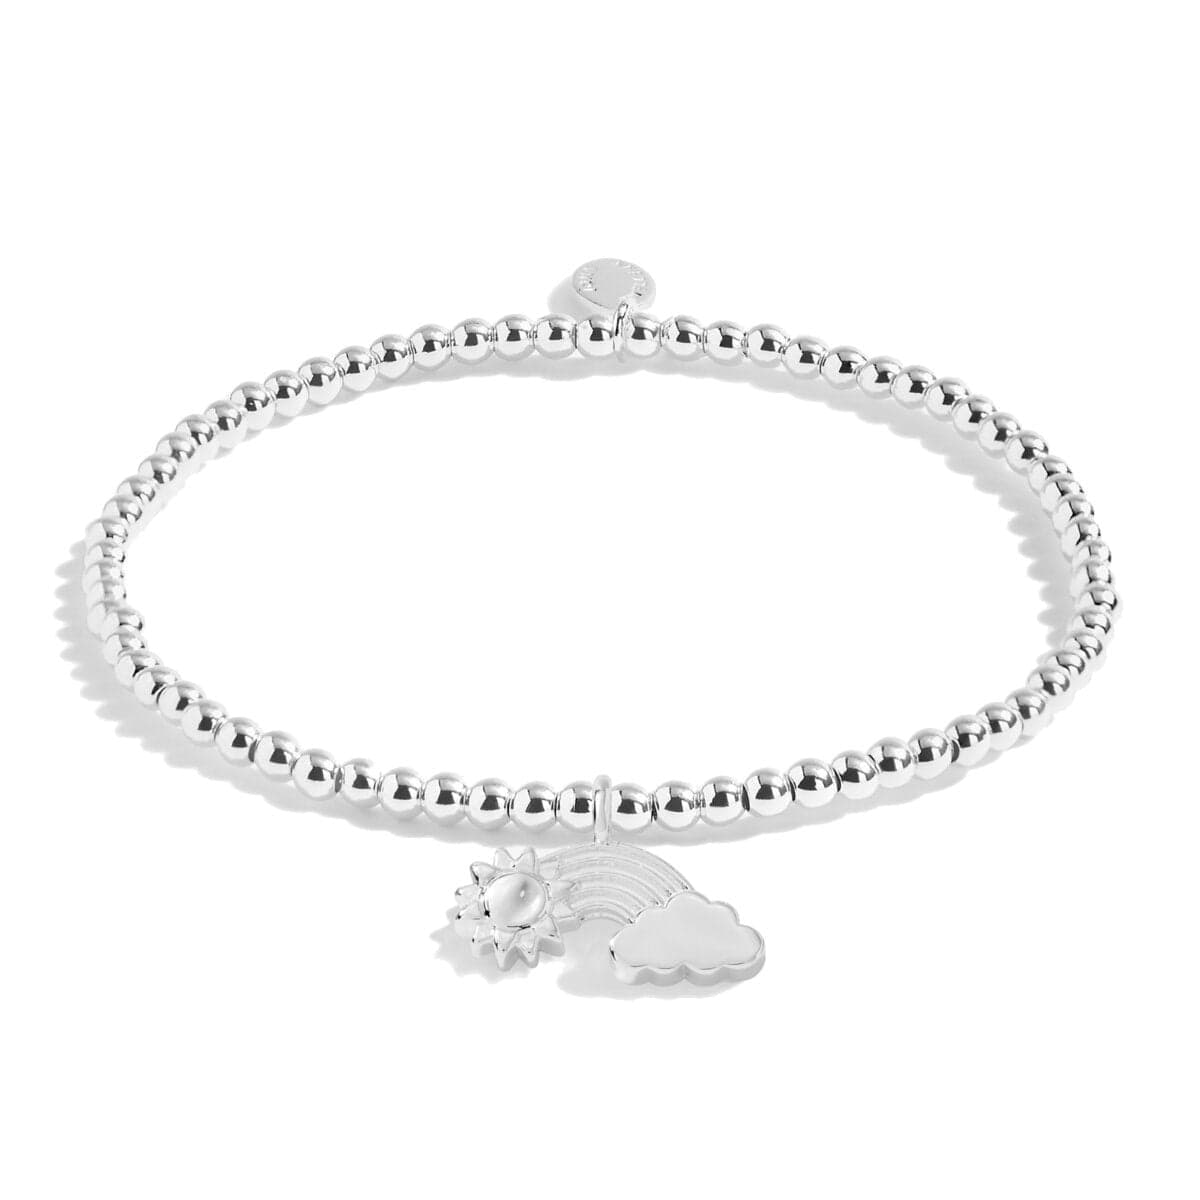 Joma Jewellery Bracelets Joma Jewellery Bracelet - A little Whatever The Weather We'll Get Through This Together